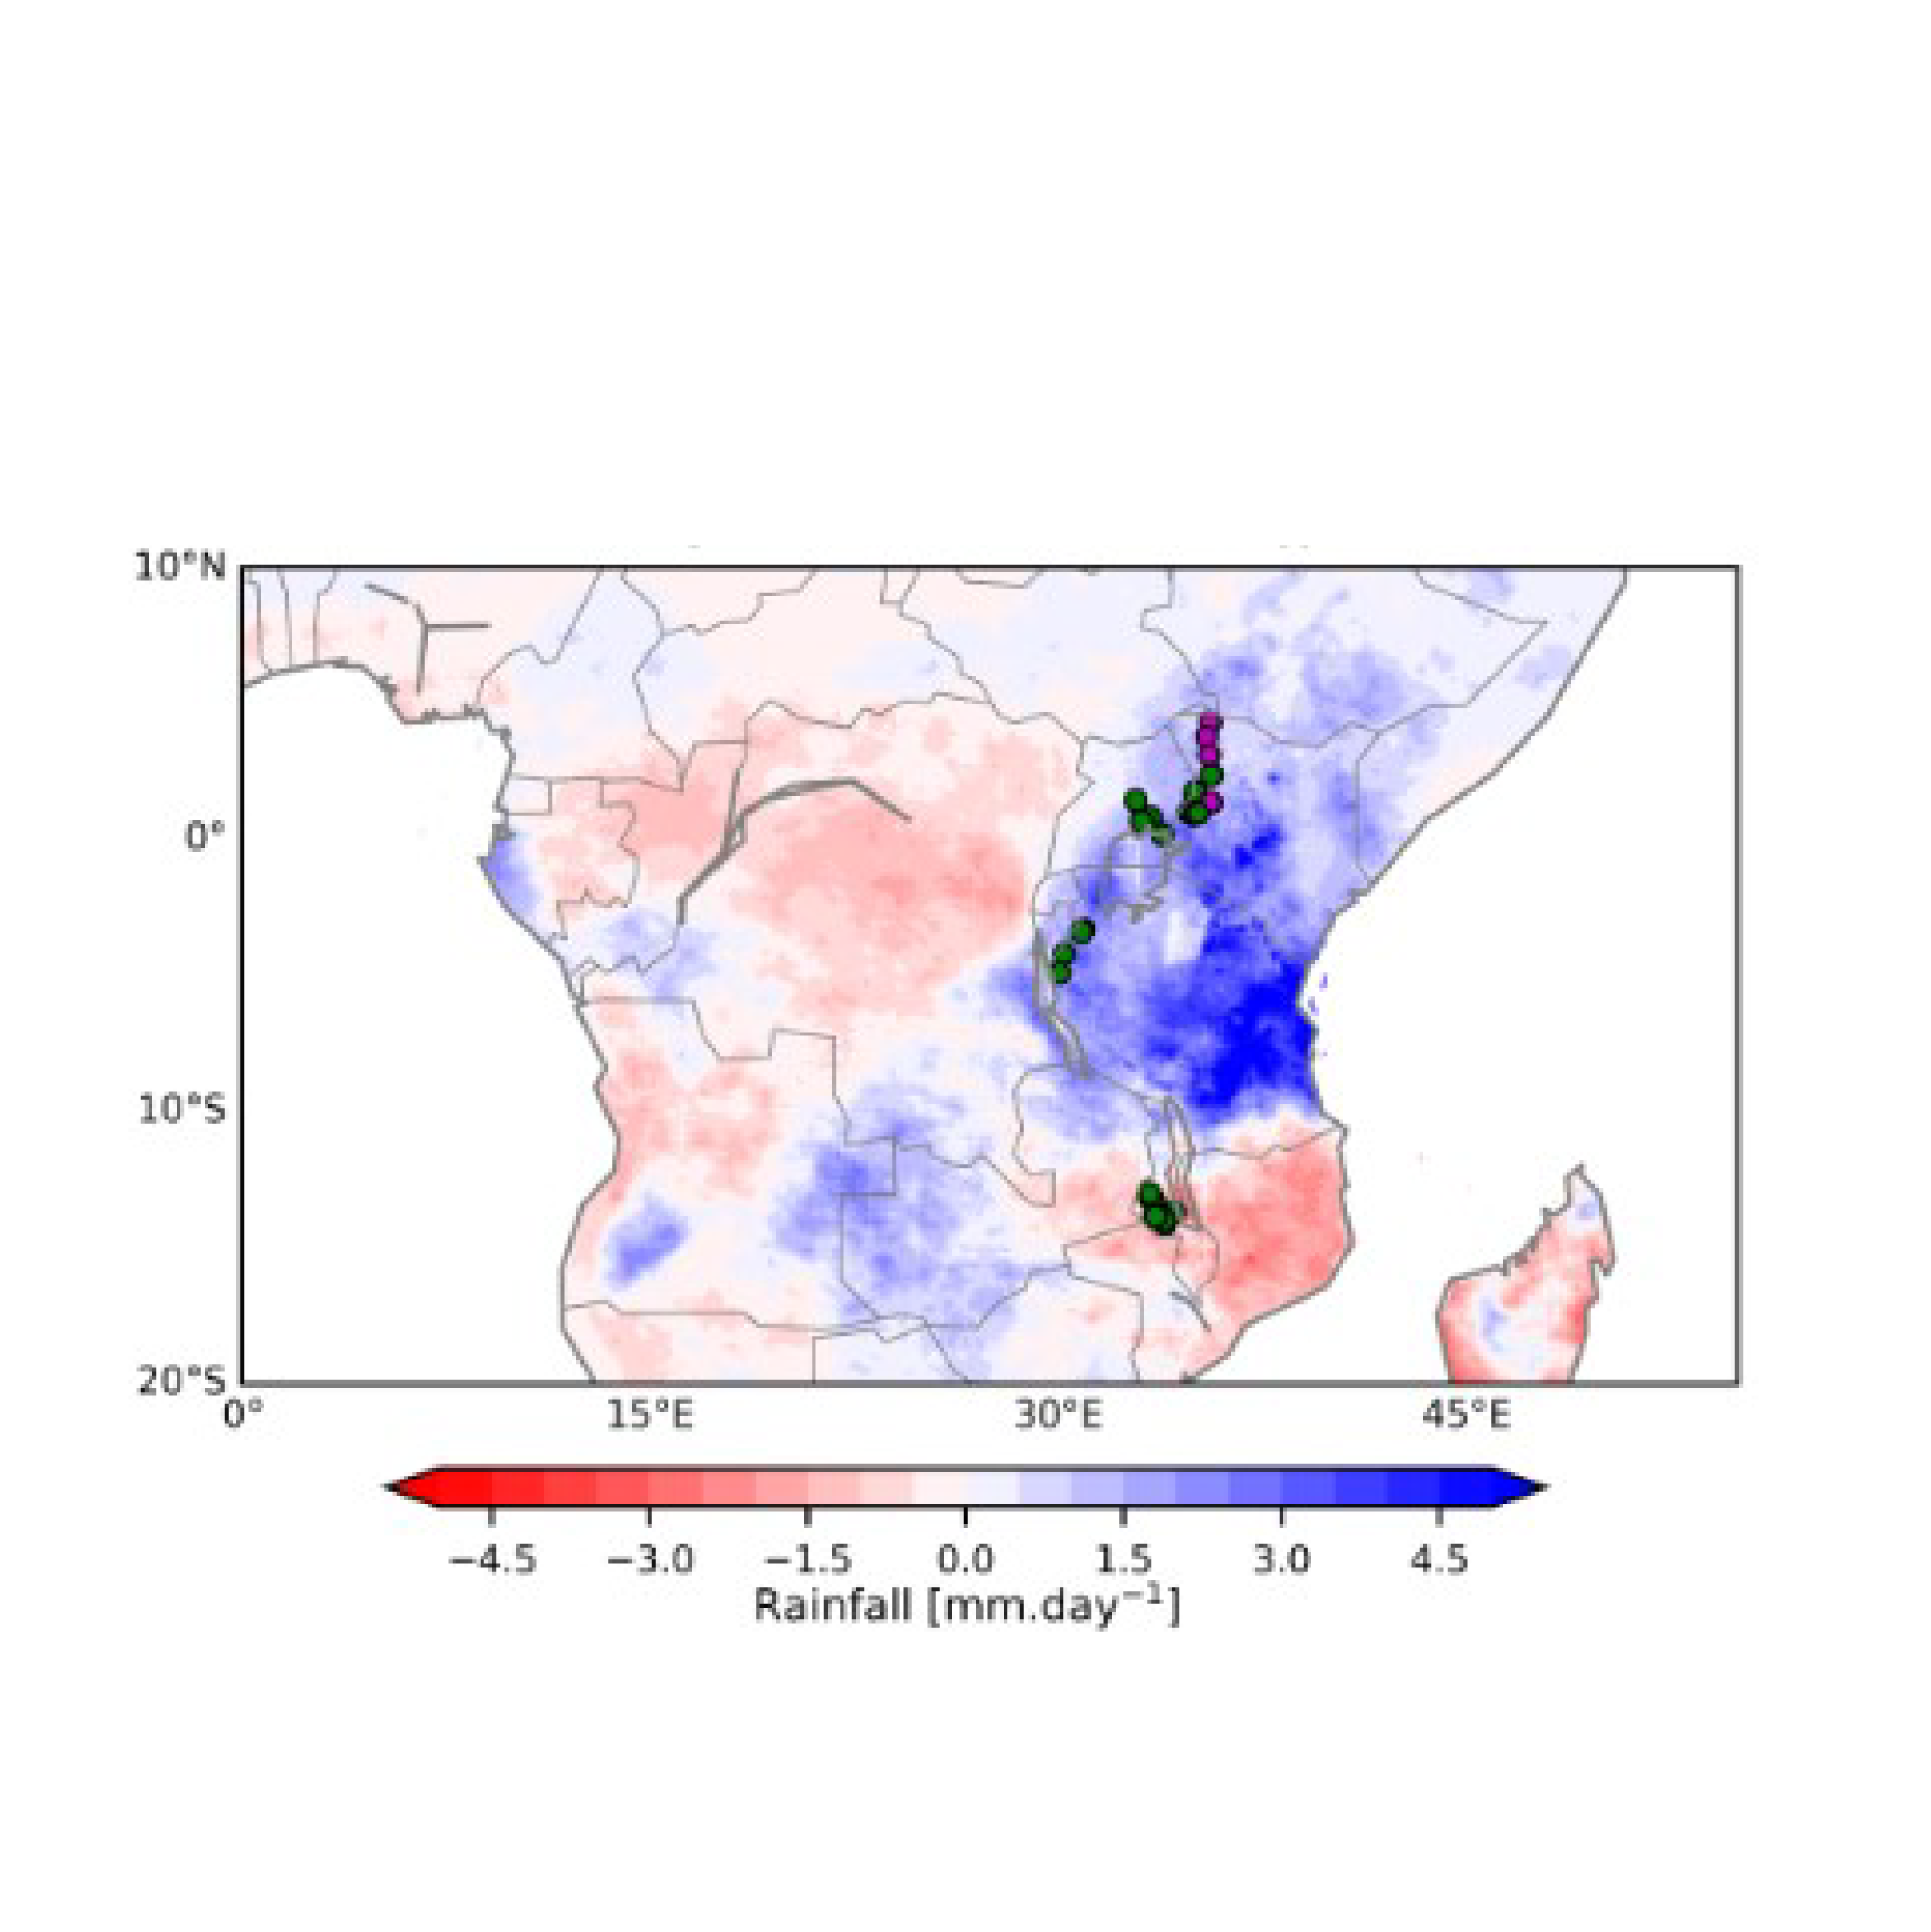 Analysis of rainfall anomalies during the period from January to April 2020 against 1983-2012 climatology indicate unusually high rainfall in Kenya, Uganda, and Tanzania and low levels of rainfall in Malawi. Green dots indicate locations of piped schemes where a pay-as-you-fetch payment modality is employed. Magenta dots indicate locations of piped schemes where a monthly fee payment modality is employed. (Source: Armstrong, Hope, and Munday 2021)